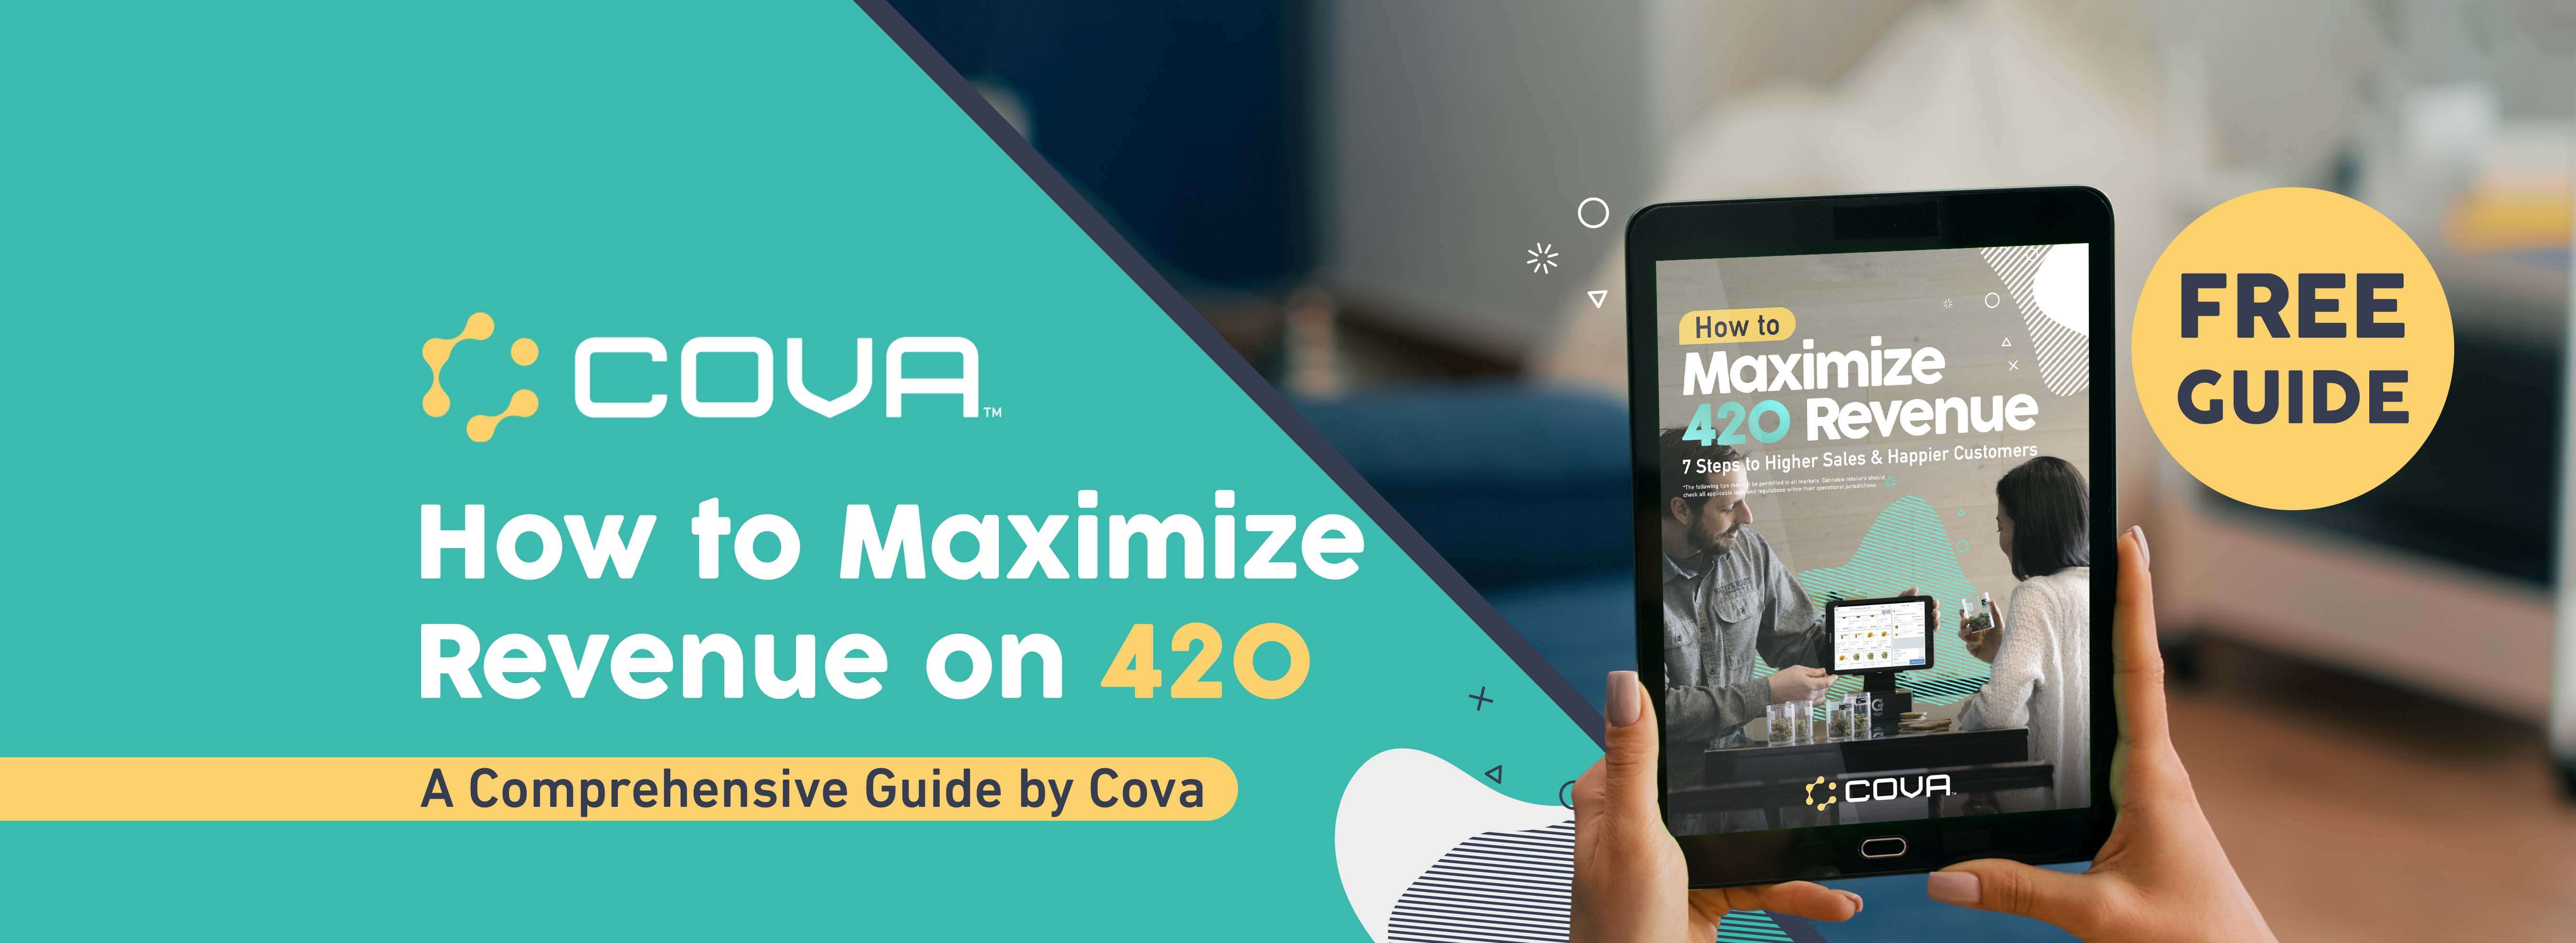 Cova-Landing-Page-How to Maximize Revenue on 420-FREE-GUIDE-YELLOW